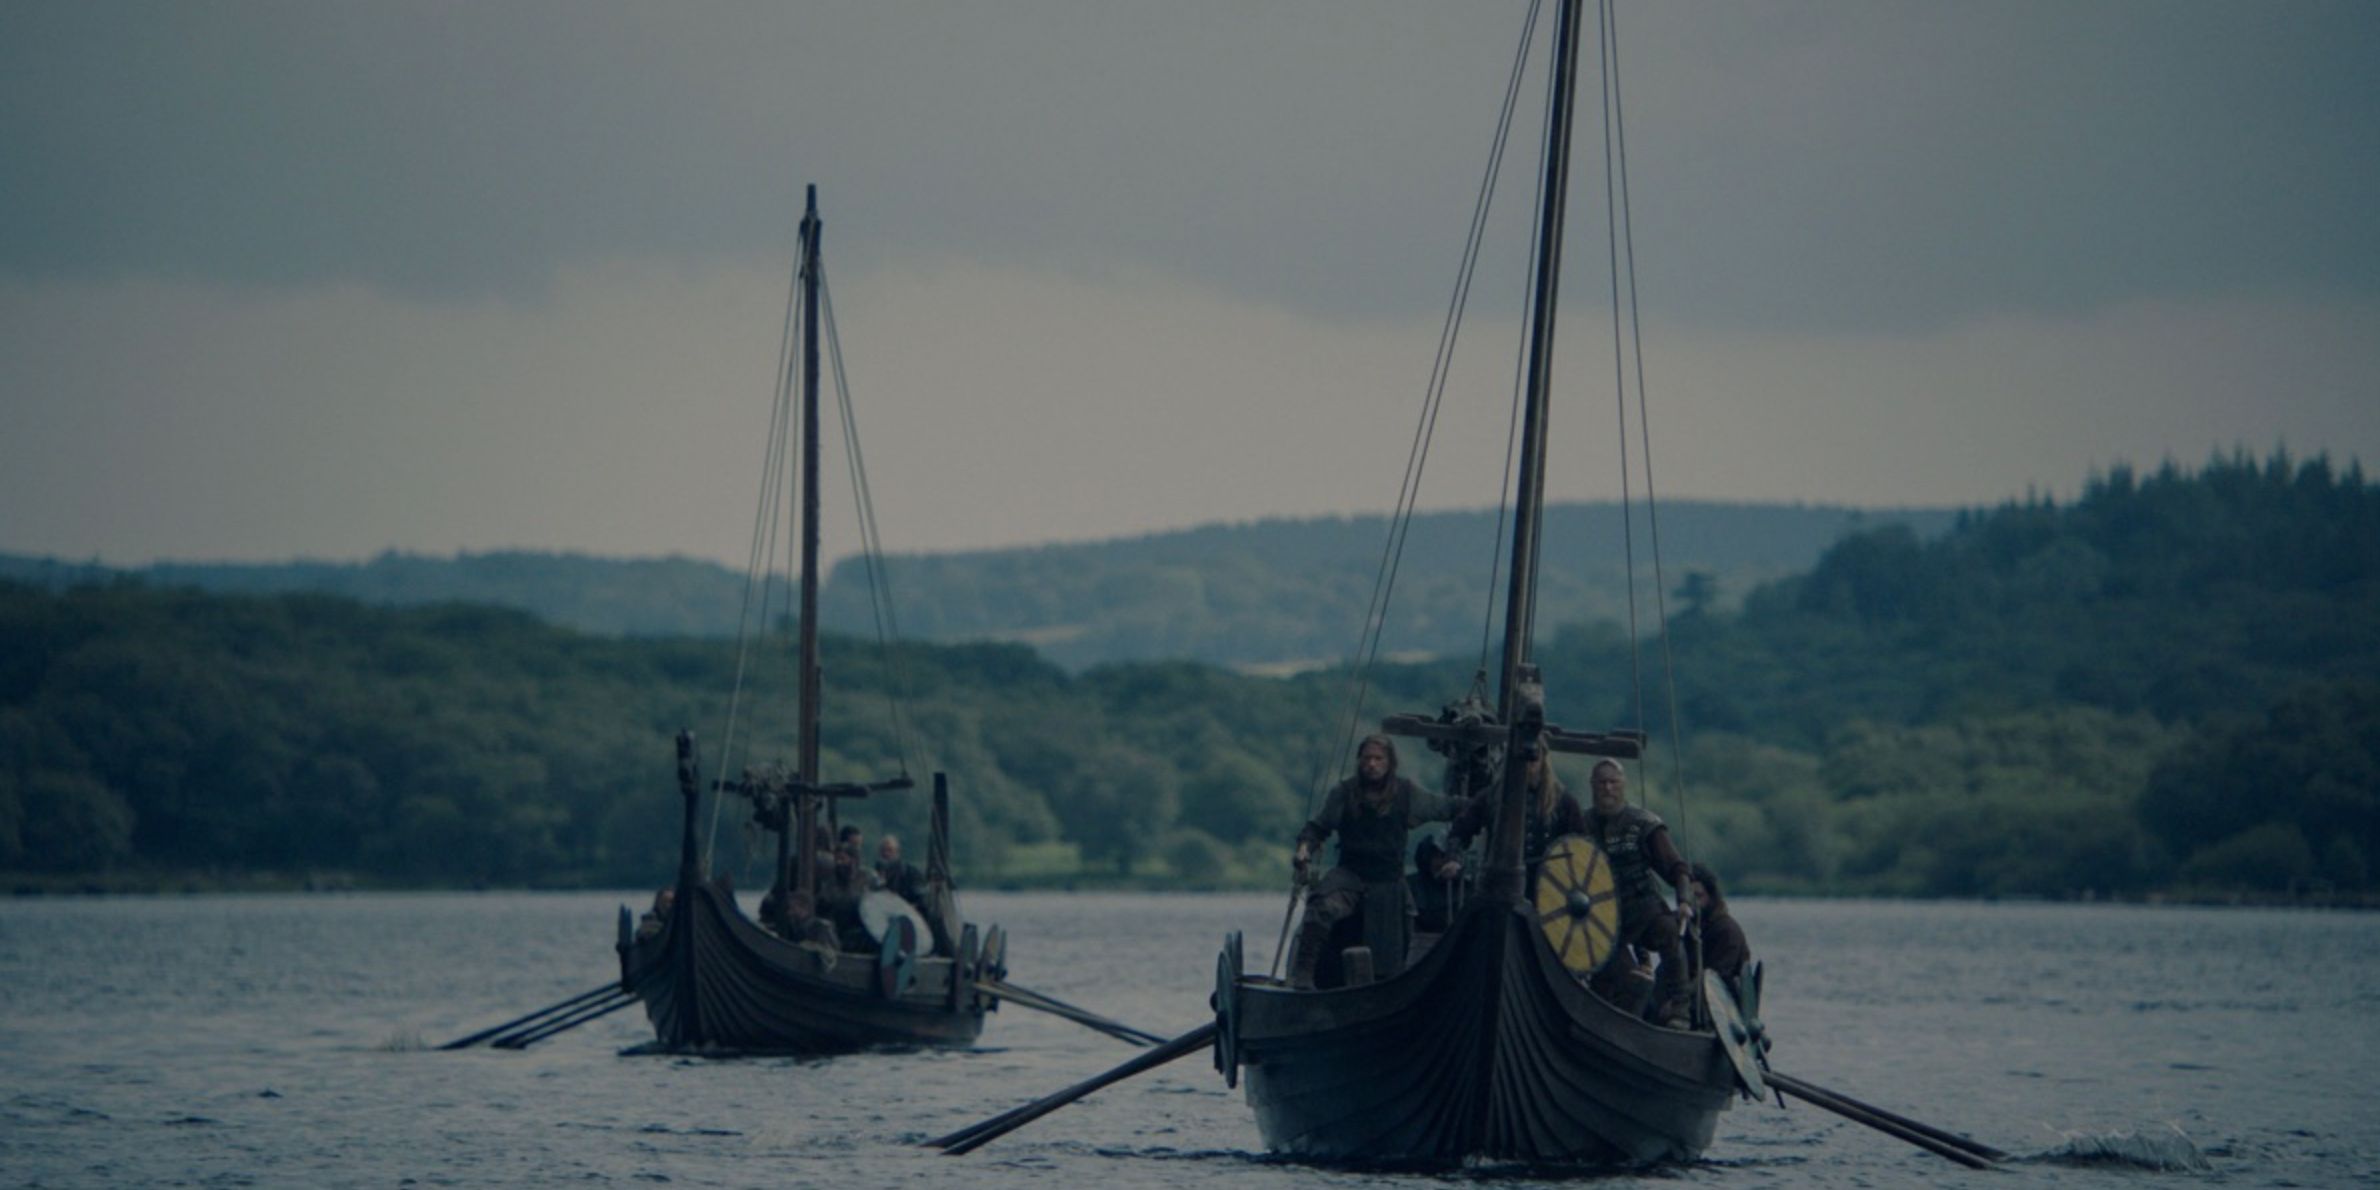 Two Viking ships on the water in The Last Journey Of The Vikings